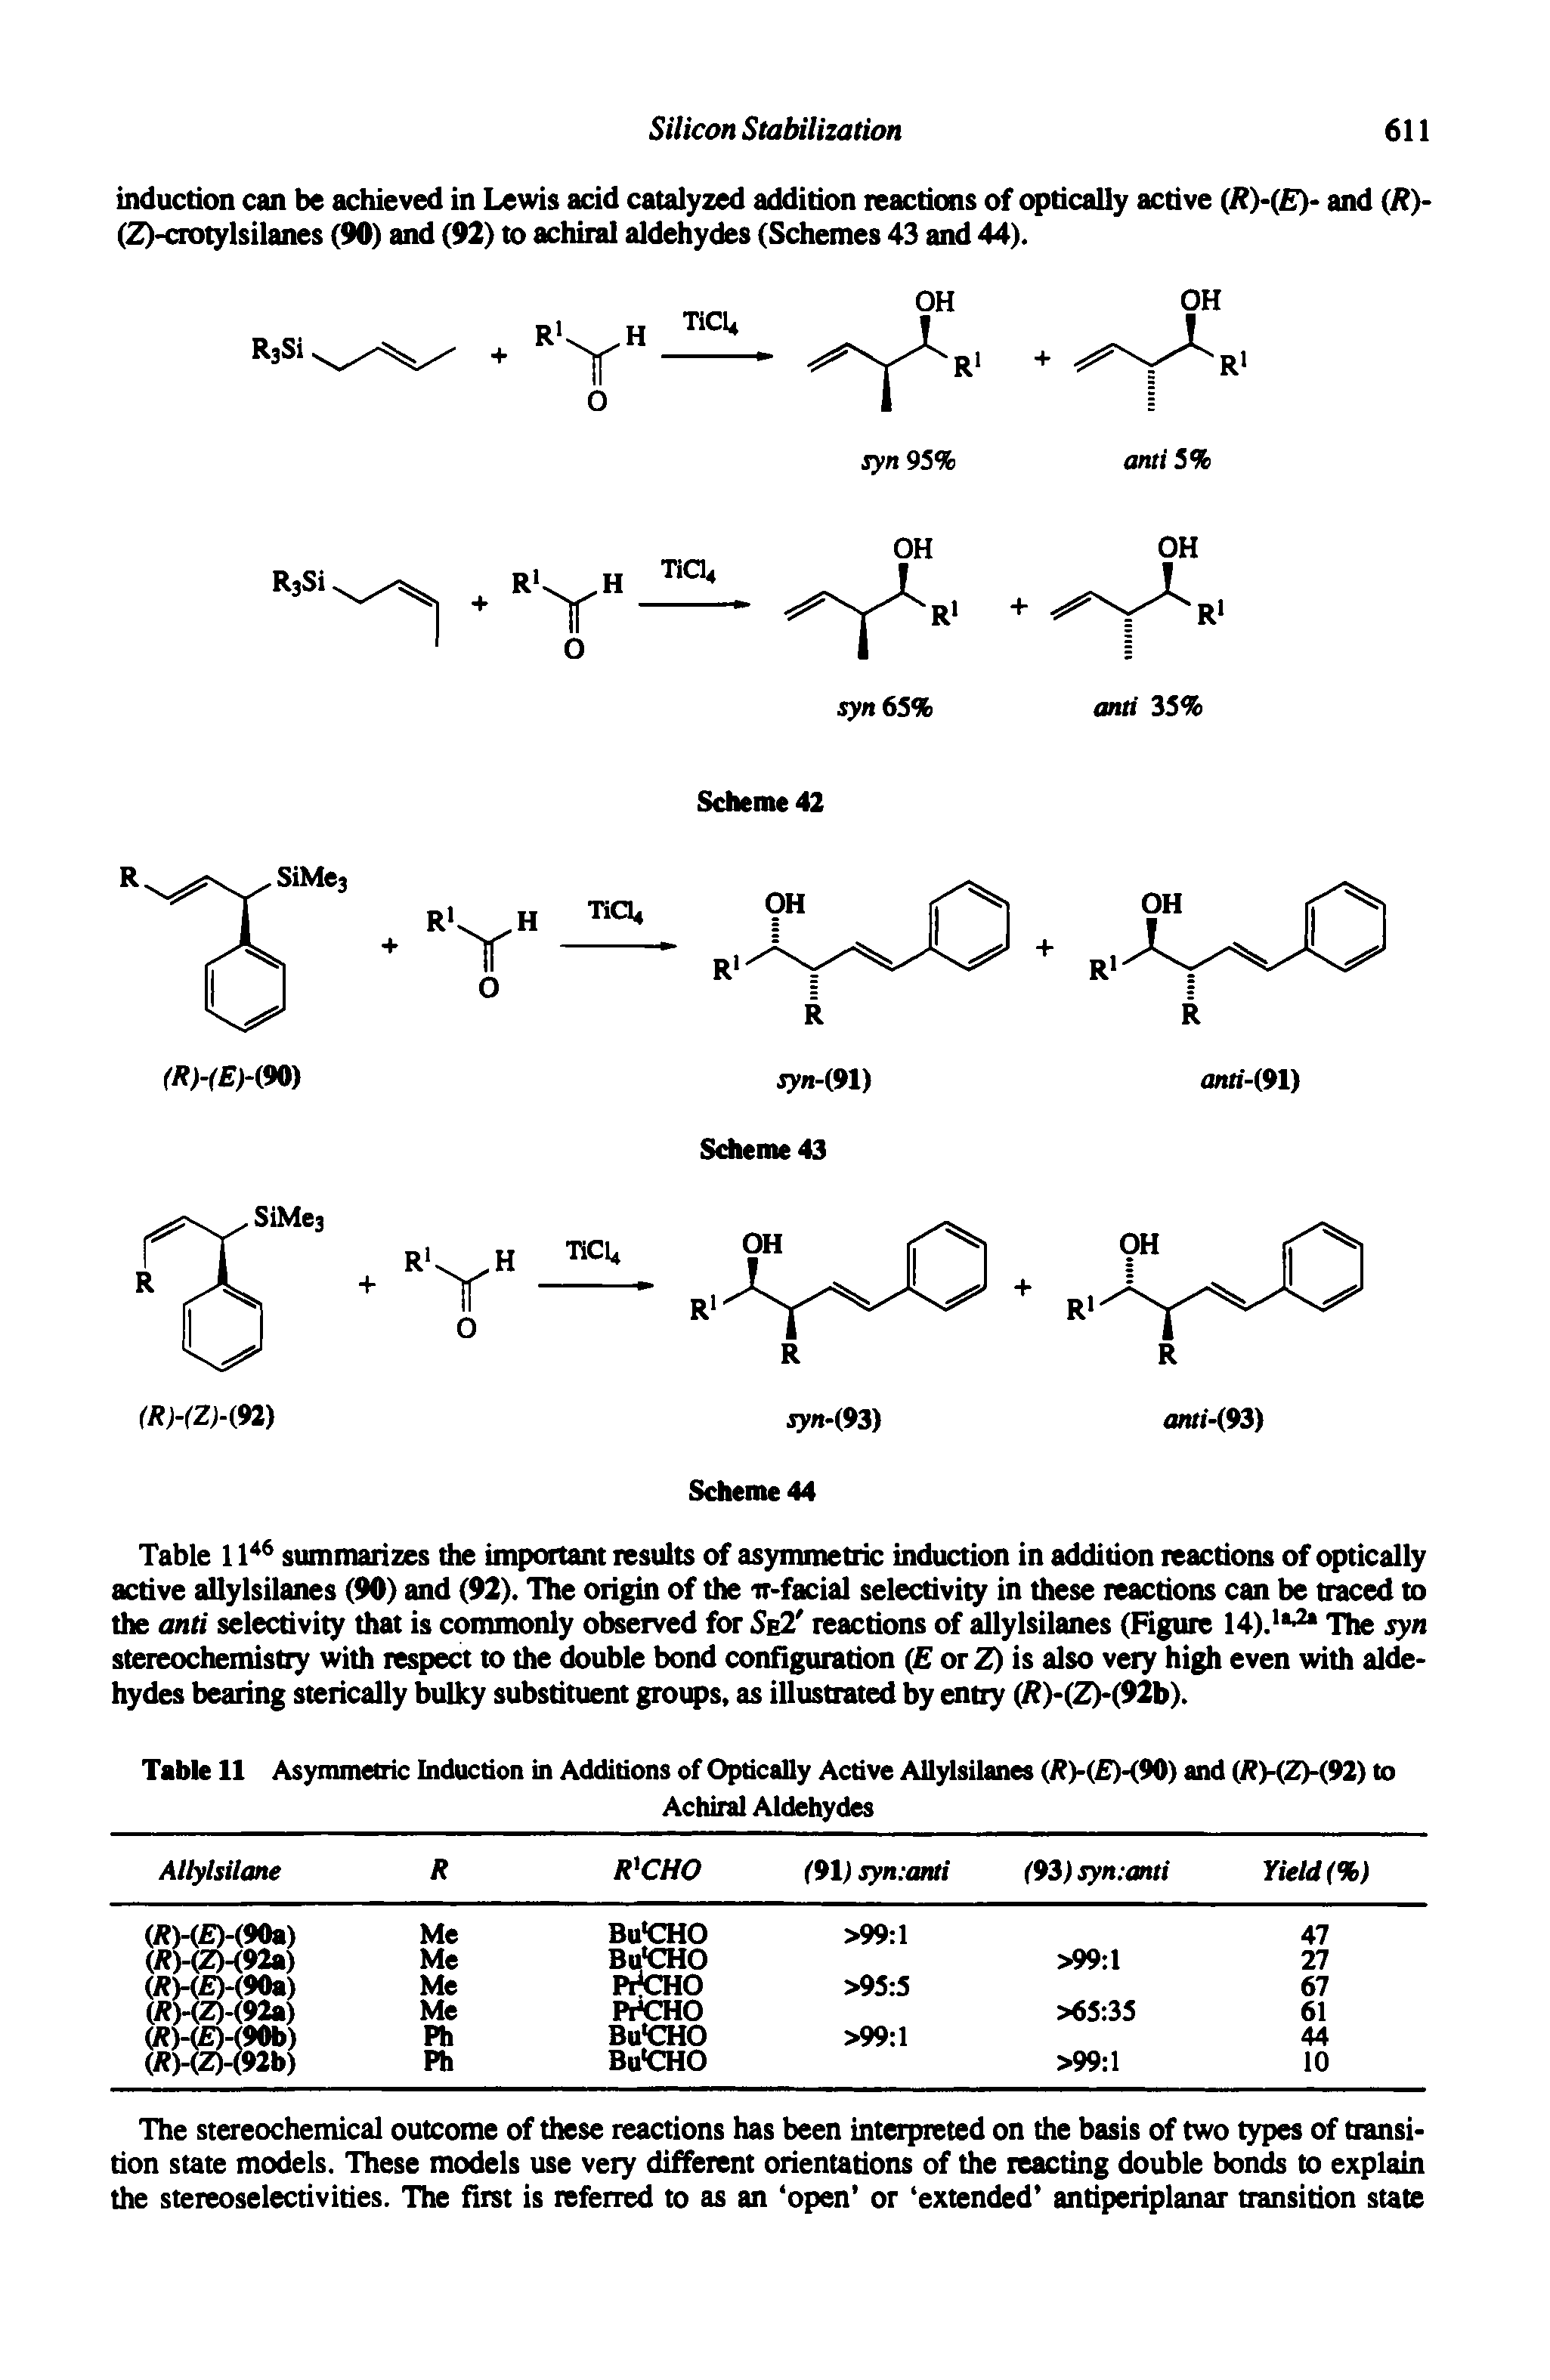 Table 11 Asymmetric Induction in Additions of Optically Active Allylsilanes (R)-( )-(90) and (R)-(Z)-(92) to...